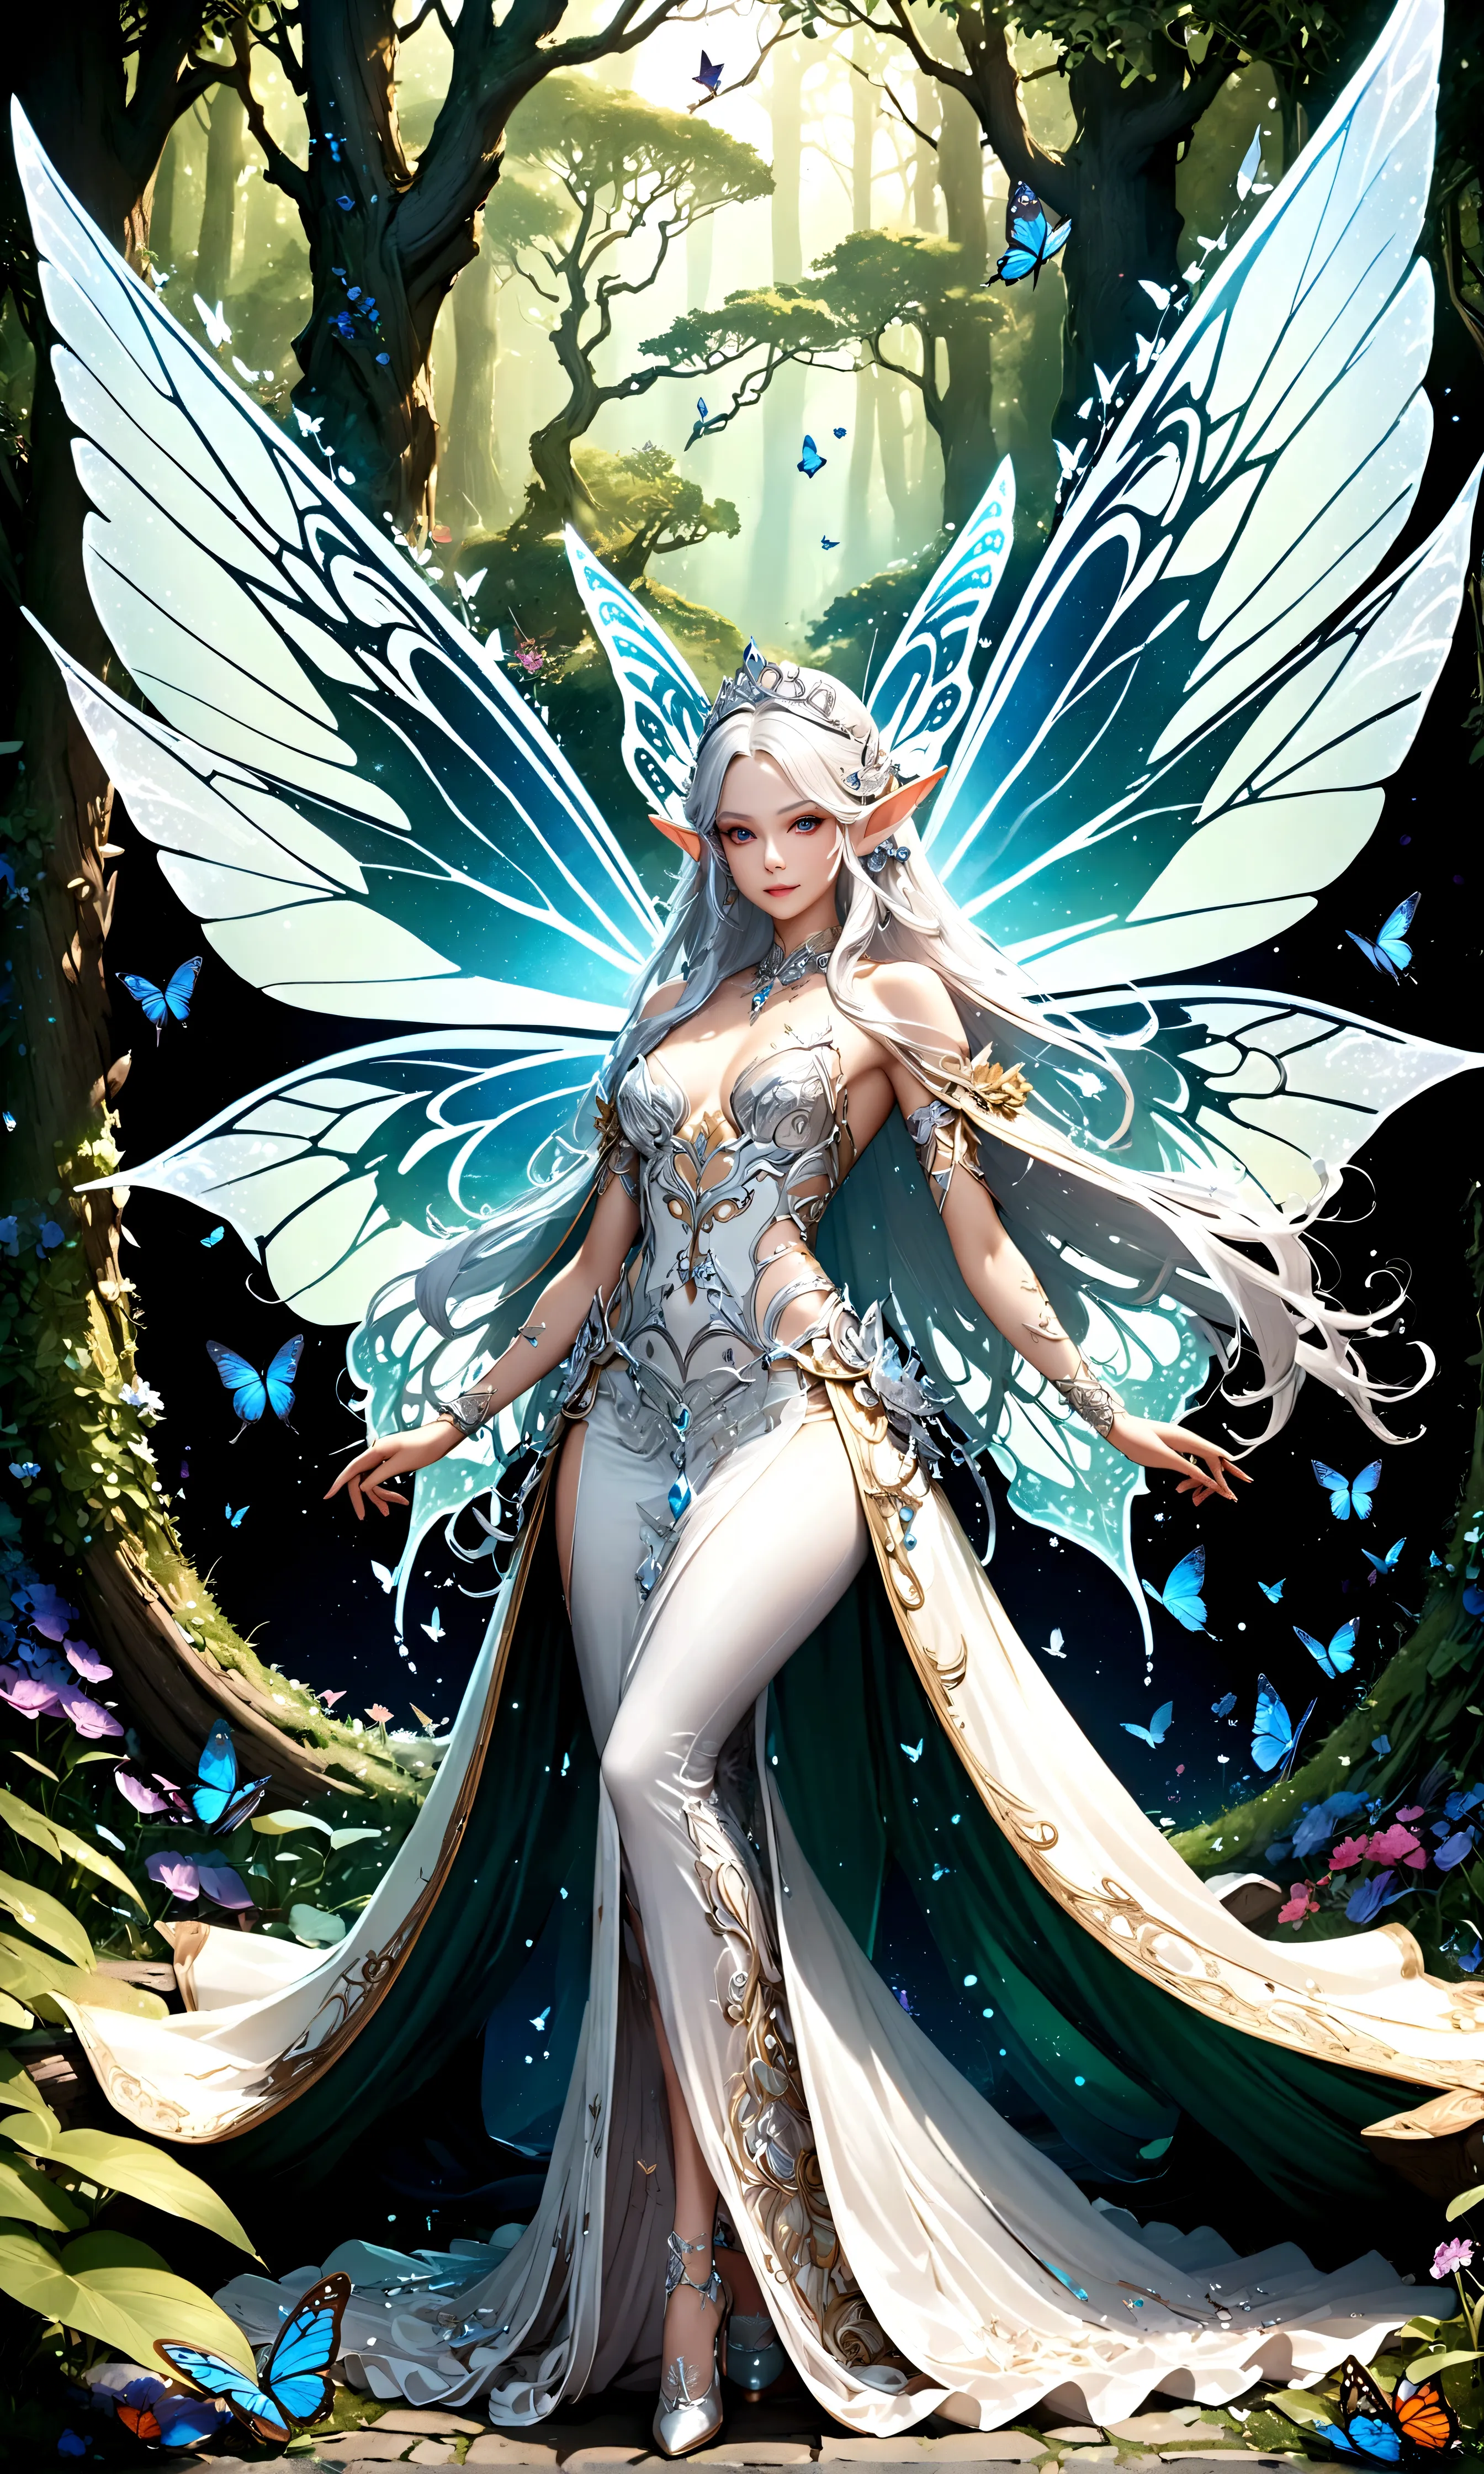 draw the queen of spirits,white skin type,perfect face,pointed ears,elf elements,Queen's tiara made of silver,noble and beautifu...